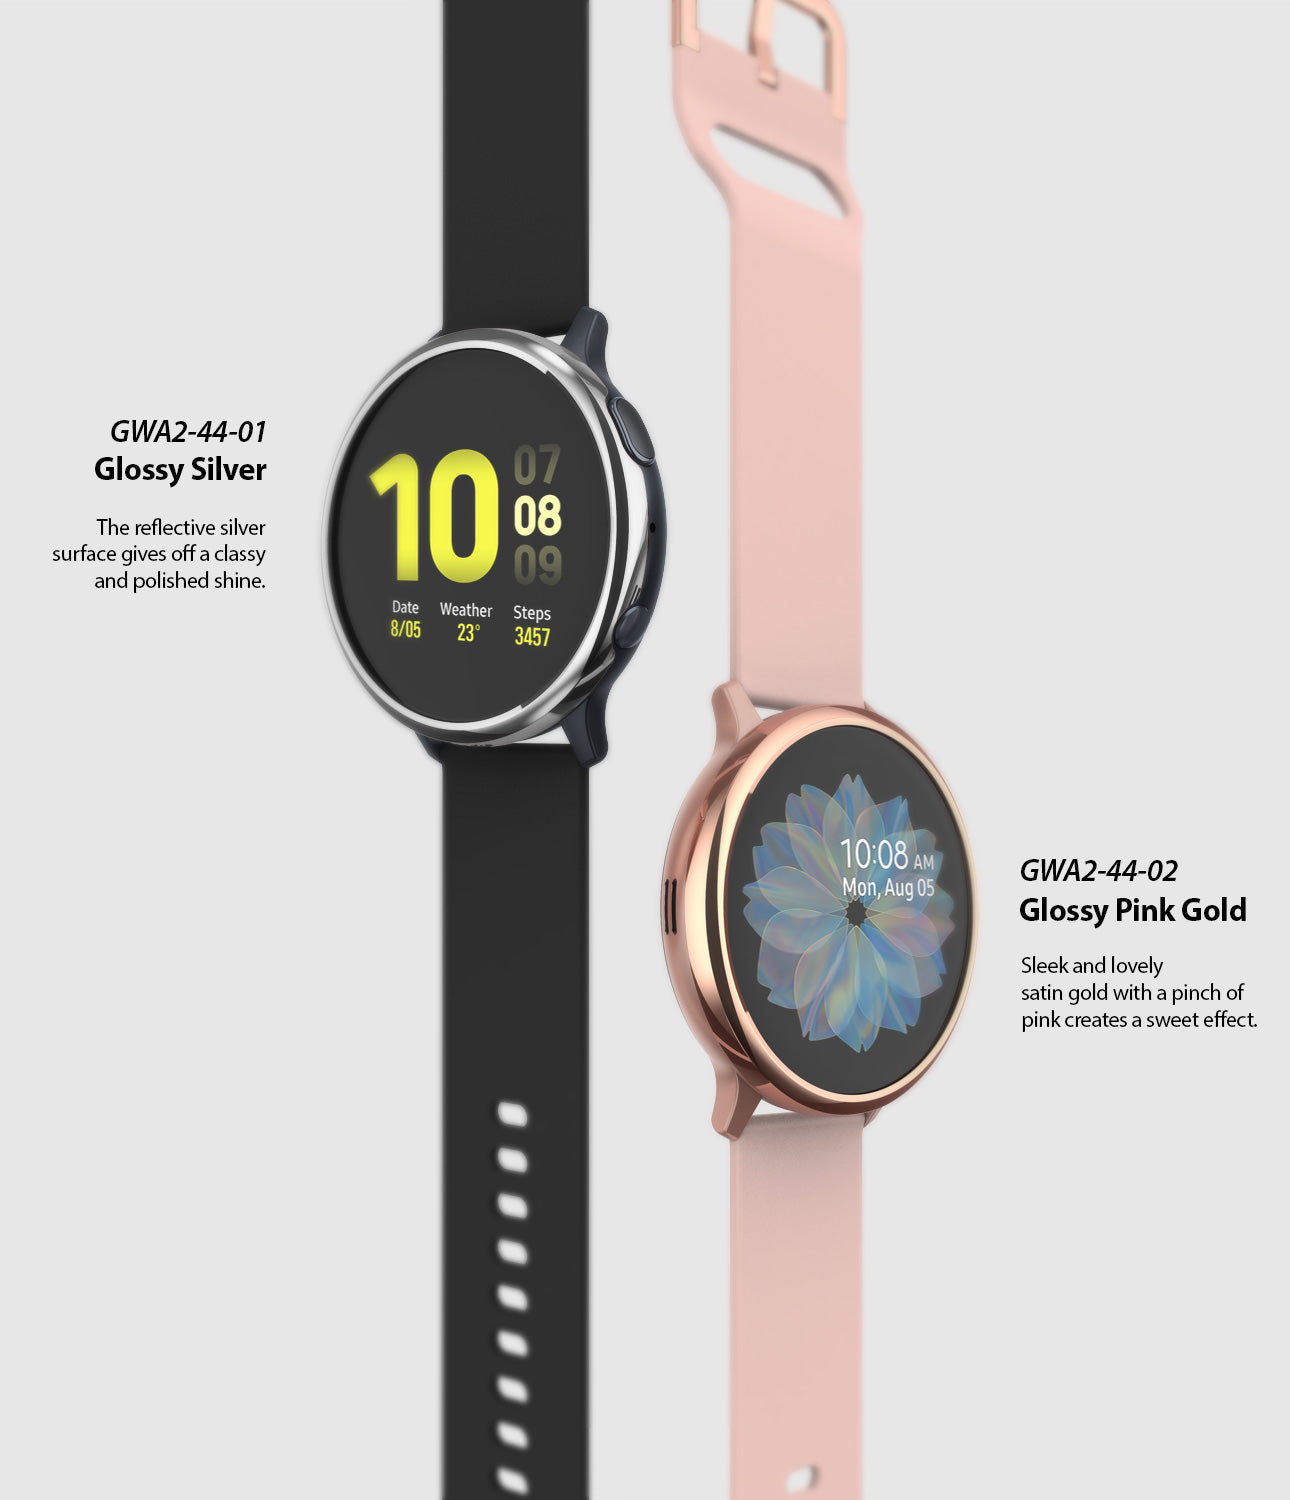 ringke bezel styling for galaxy watch active 2 44mm stainless steel various colors and styles